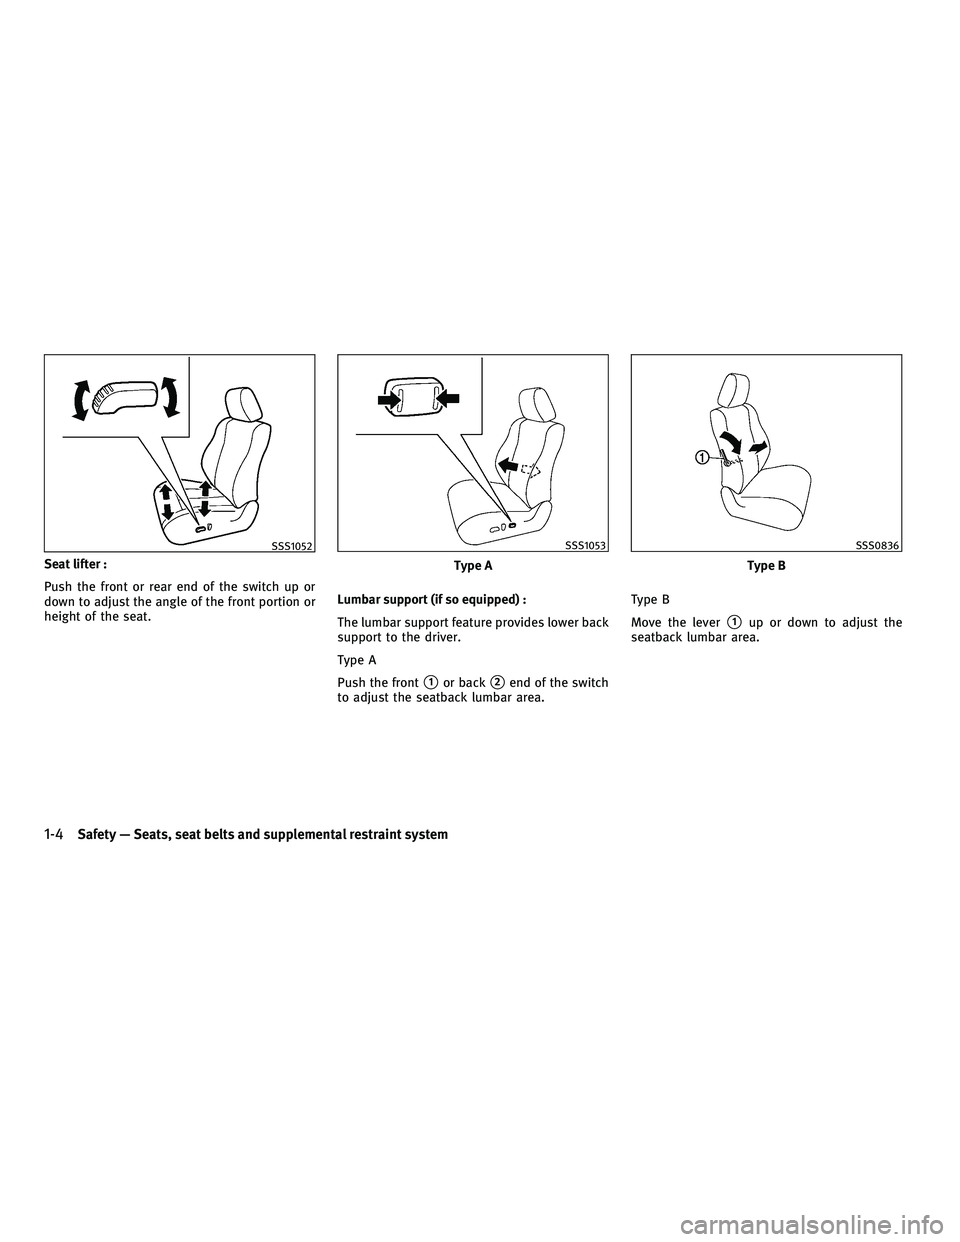 INFINITI G 2010 Owners Manual Seat lifter :
Push the front or rear end of the switch up or
down to adjust the angle of the front portion or
height of the seat.Lumbar support (if so equipped) :
The lumbar support feature provides l